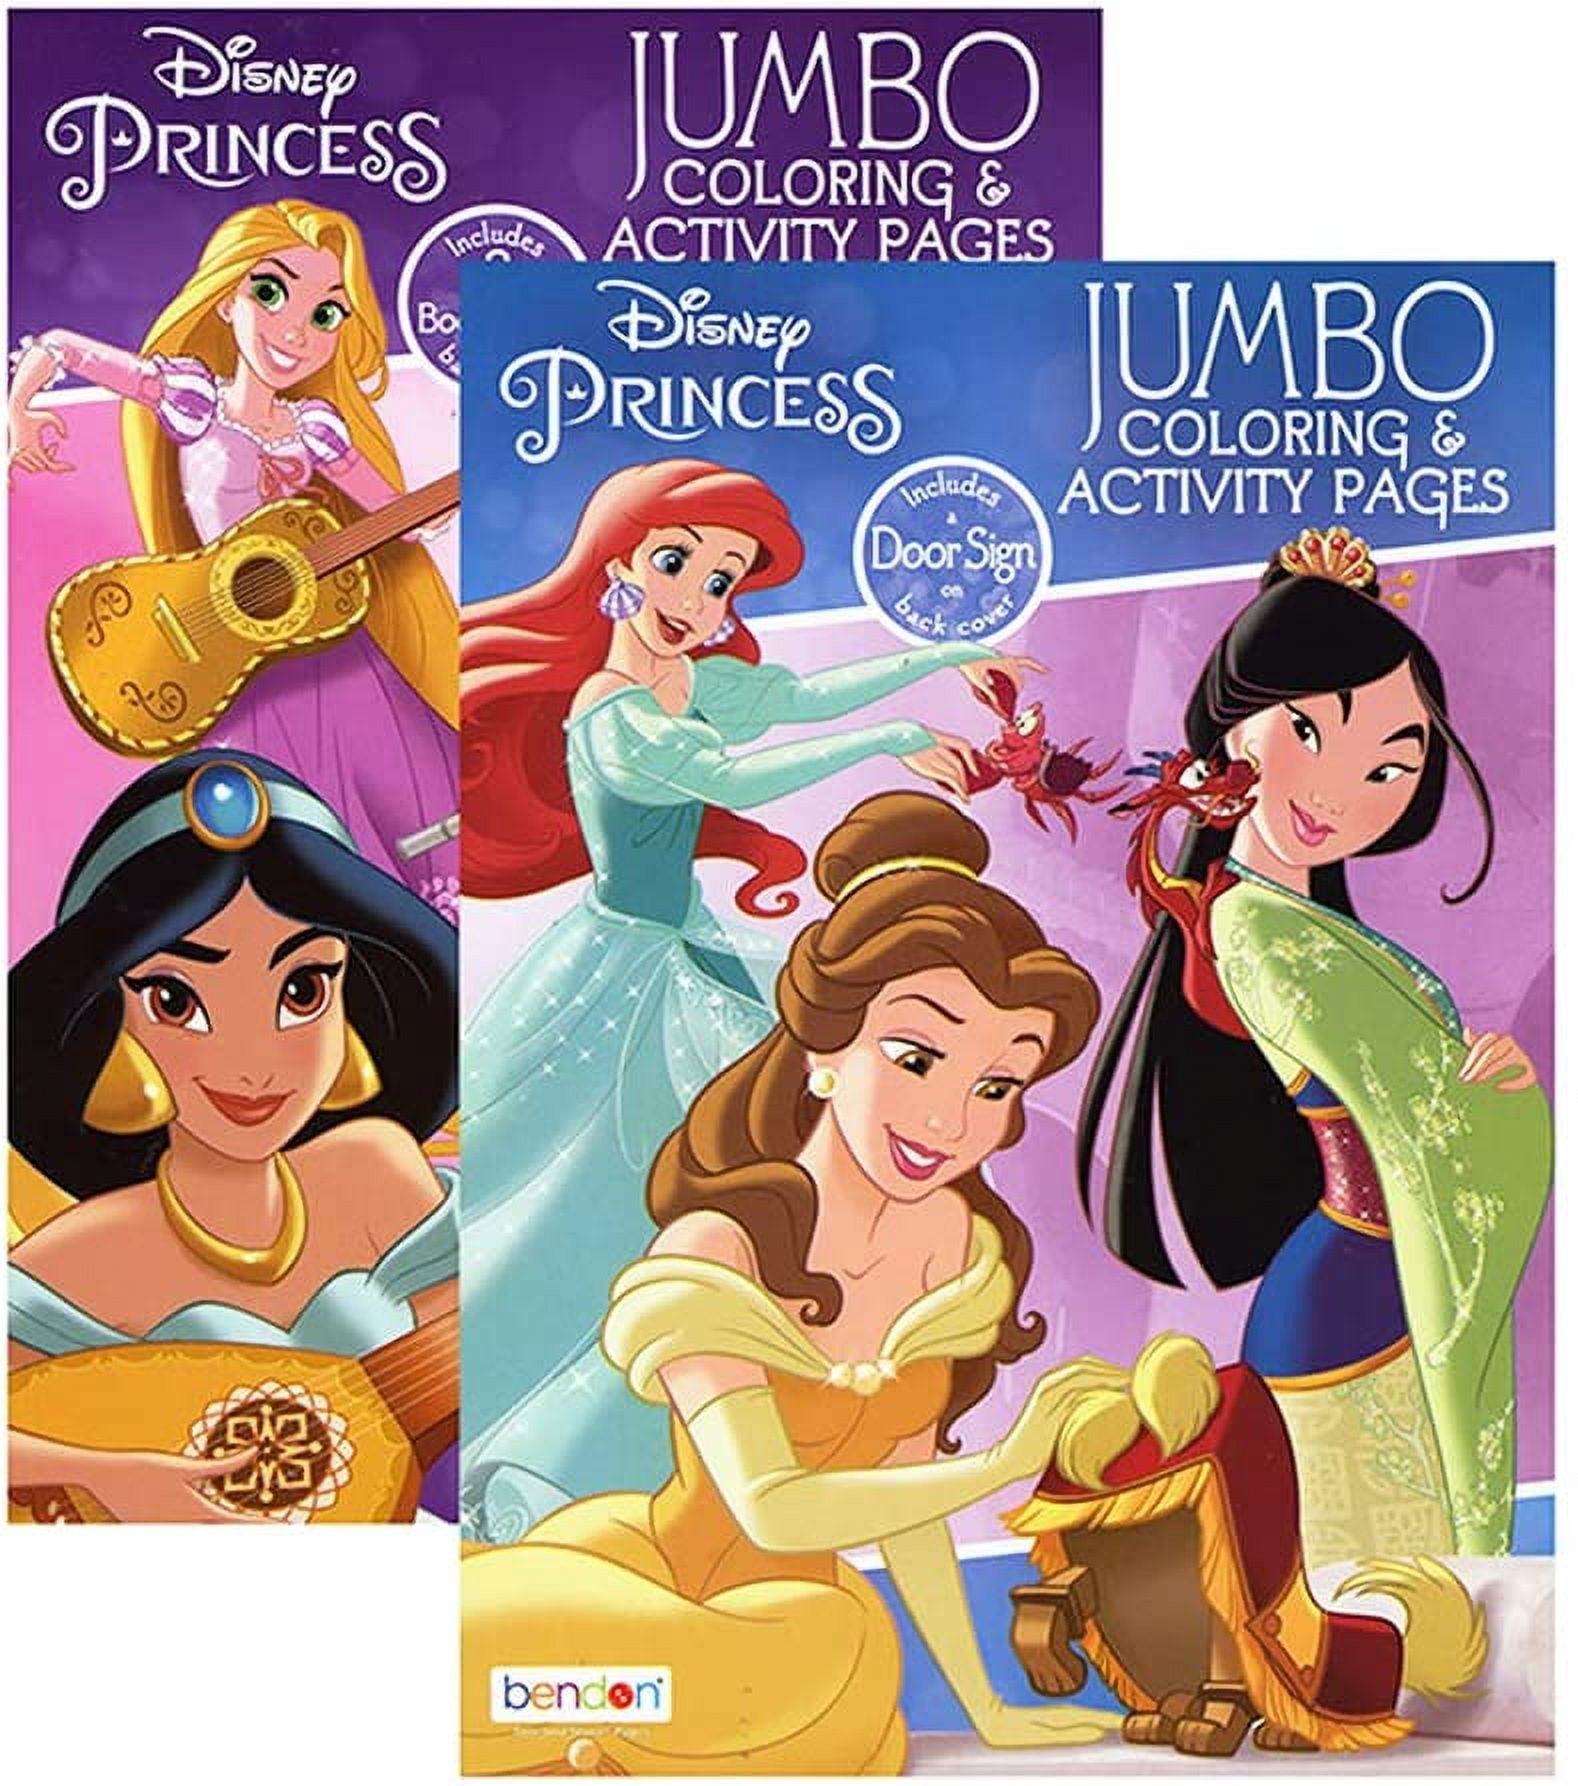 Giant Coloring Book with 50 Stickers - Disney Princess